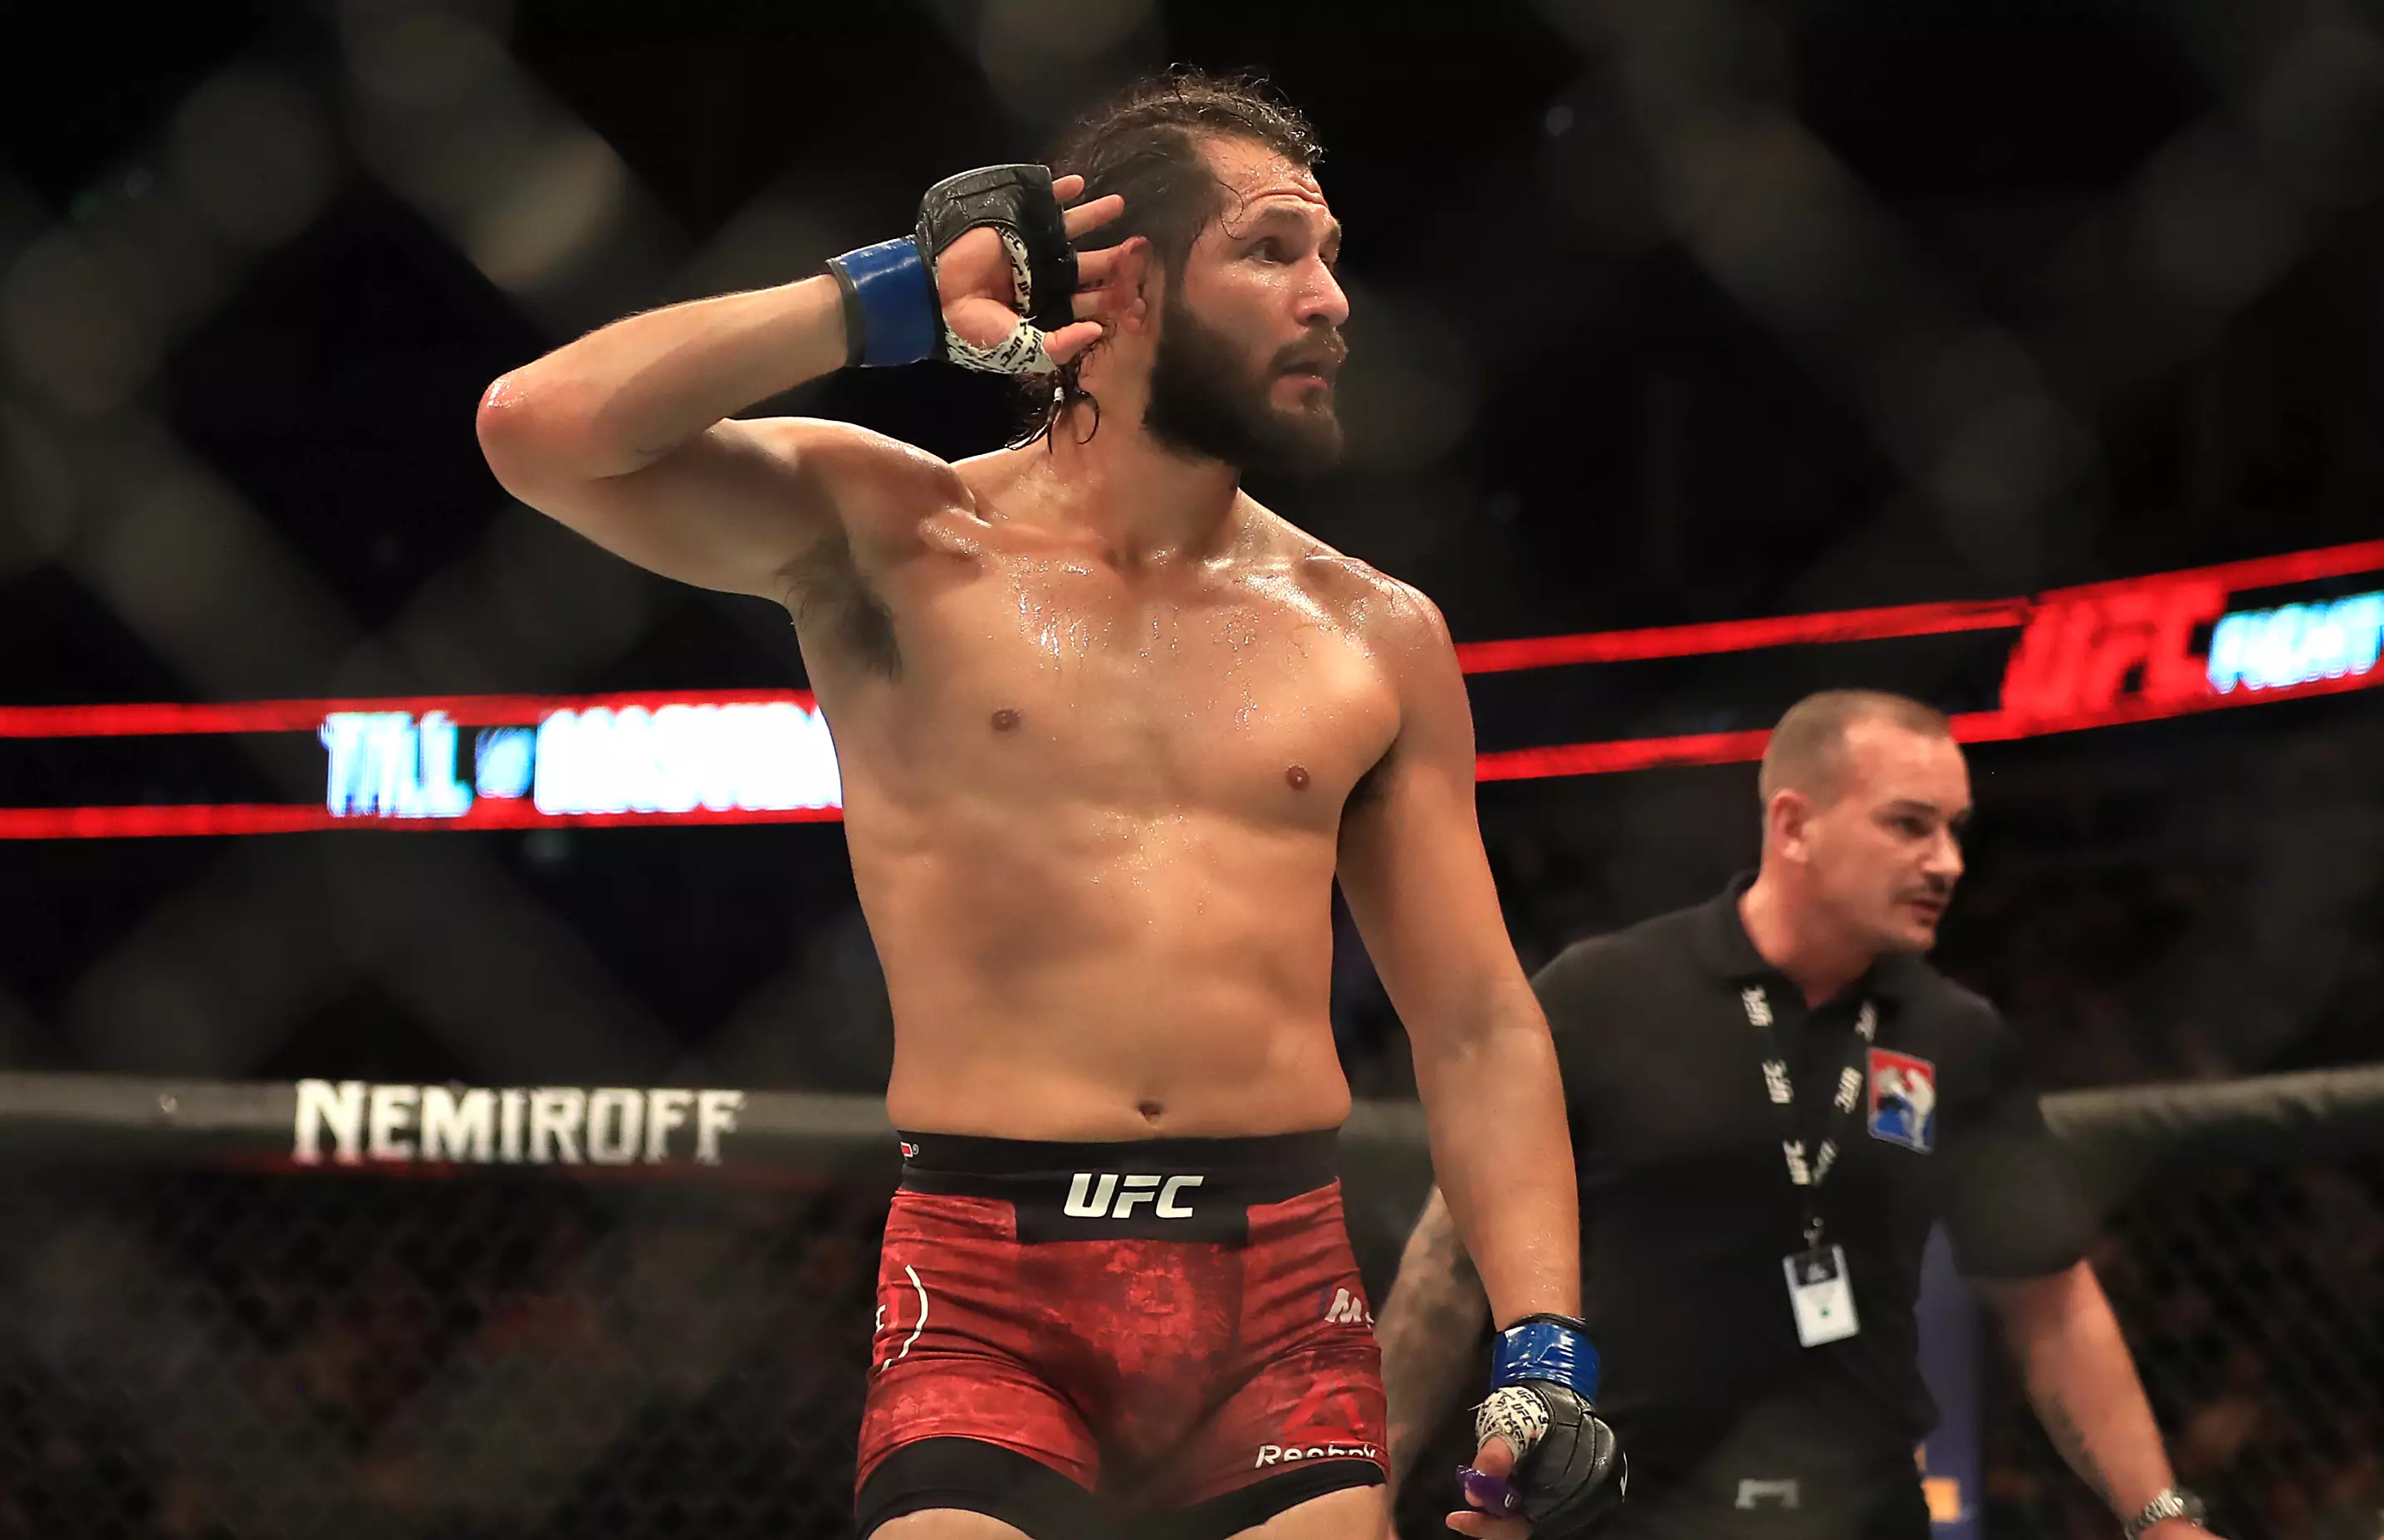 Jorge Masvidal will fight Nate Diaz in the headline event at UFC 244